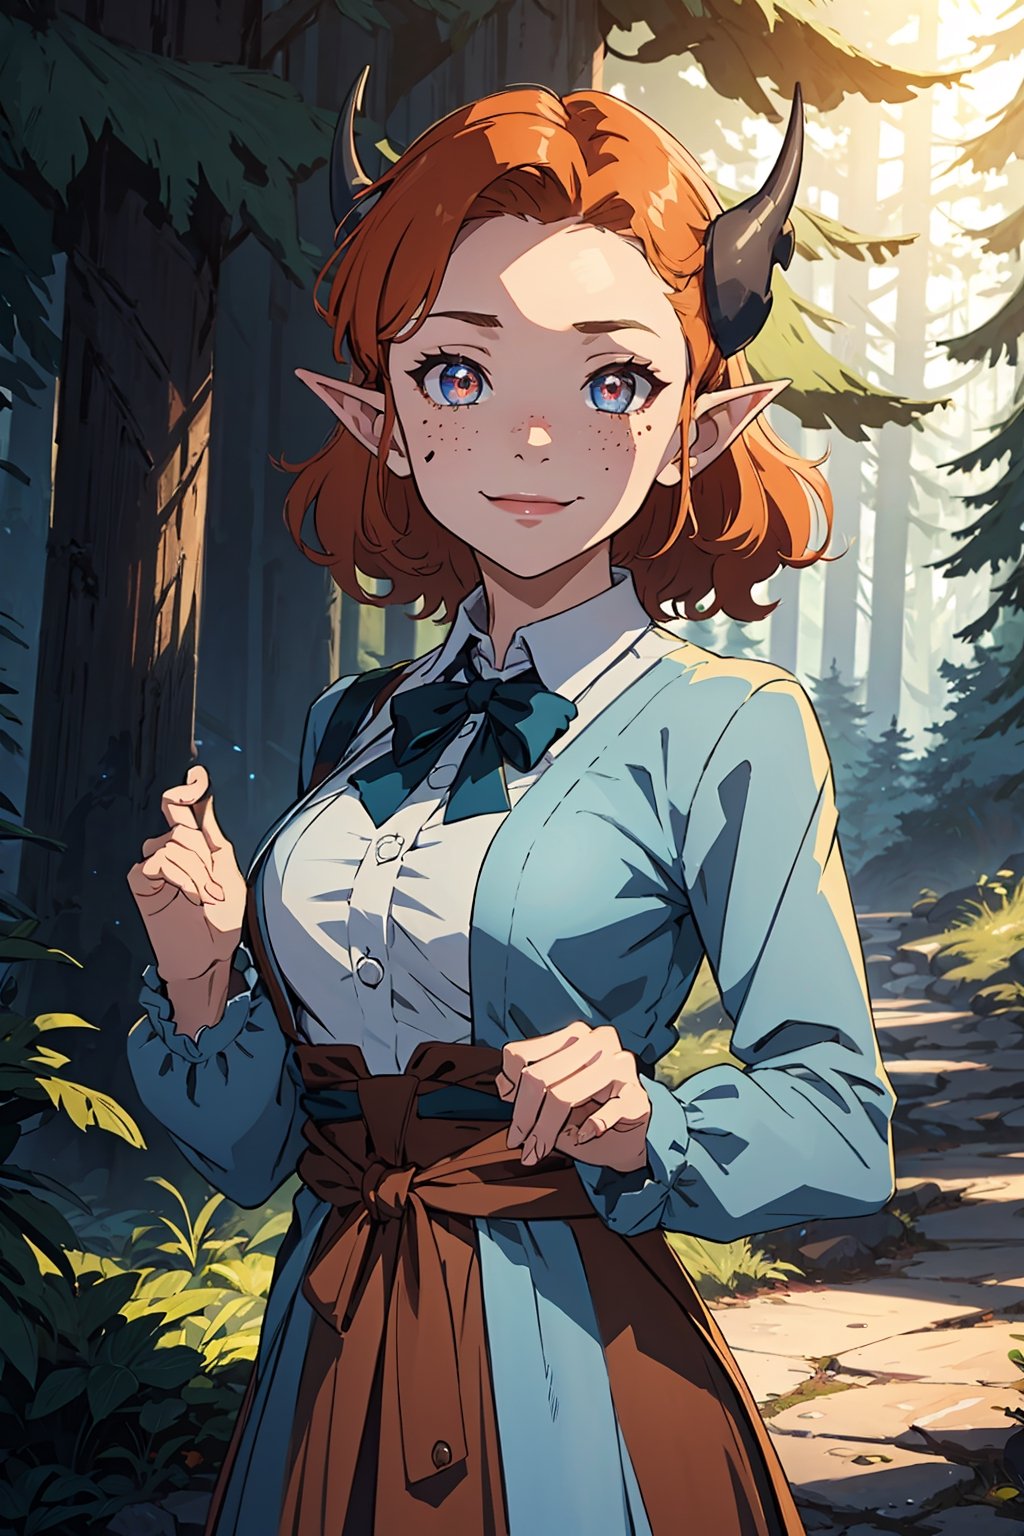 Imagine a female child with short fluffy and messy curly bright orange hair. She has small breasts and is a lolita. Her eyes are a bright shade of green, sparkling with intricate detail and a hit on magic. She has pointed elf ears. She has two short horns on her head. She has an evil smile on her face that shows she's up to no good. She has warm freckles on her face. She wears a white button up long sleeve top and a long purple skirt and long green trench coat with lots of pockets. She is practicing magic that sparkles around her. The background is a charming forest path in the enchanted woods with bright lighting, creating a magical ambiance. This artwork captures the essence of mischief and magic against the backdrop of a beautiful setting. detailed, detail_eyes, detailed_hair, detailed_scenario, detailed_hands, detailed_background, vox machina style